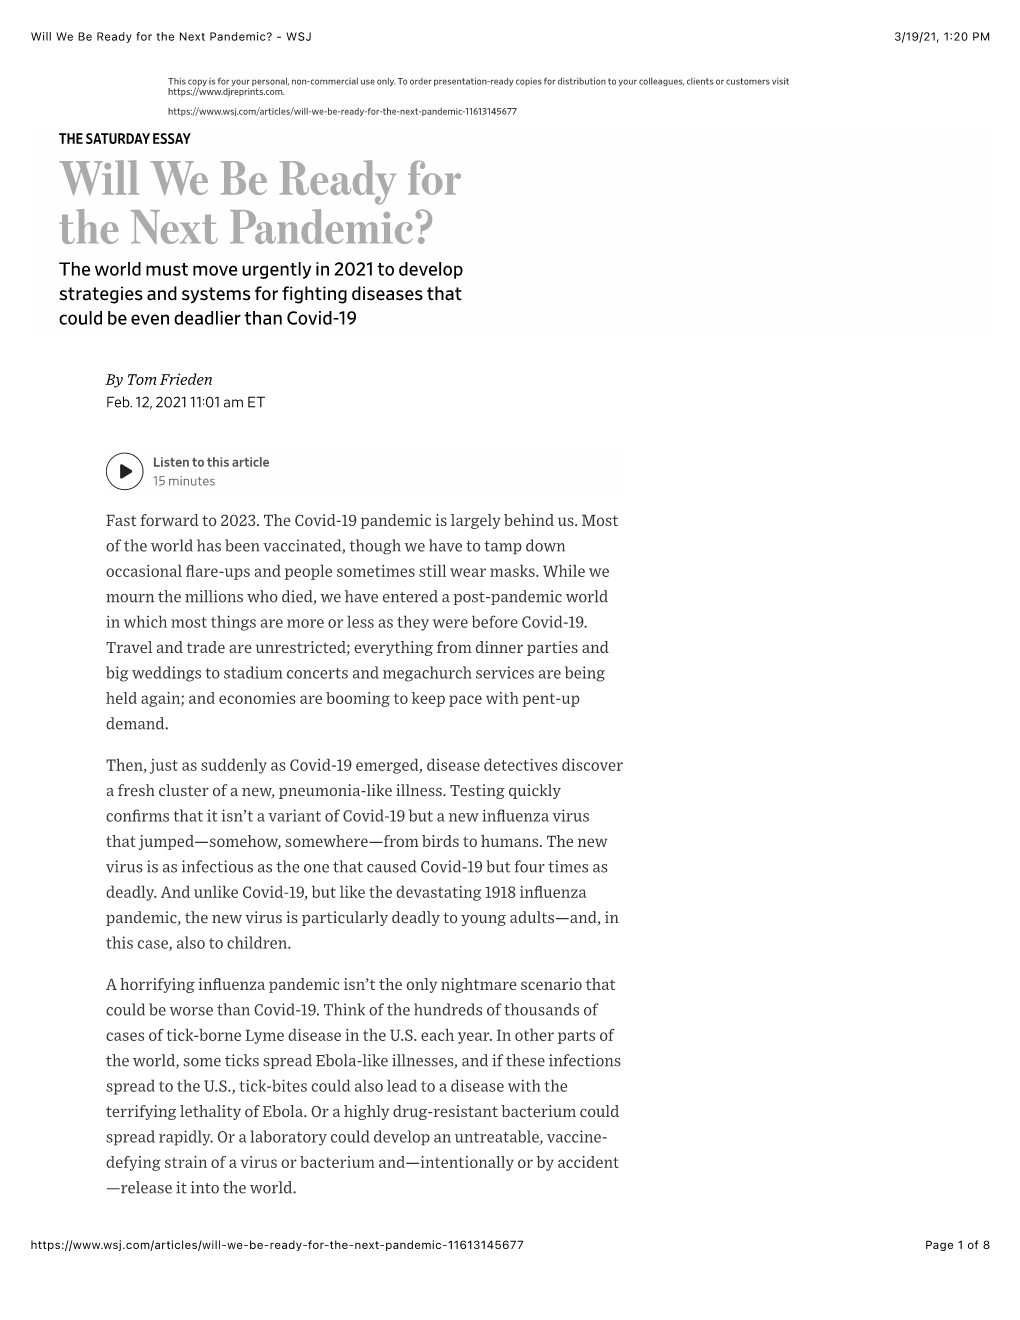 Will We Be Ready for the Next Pandemic? - WSJ 3/19/21, 1:20 PM